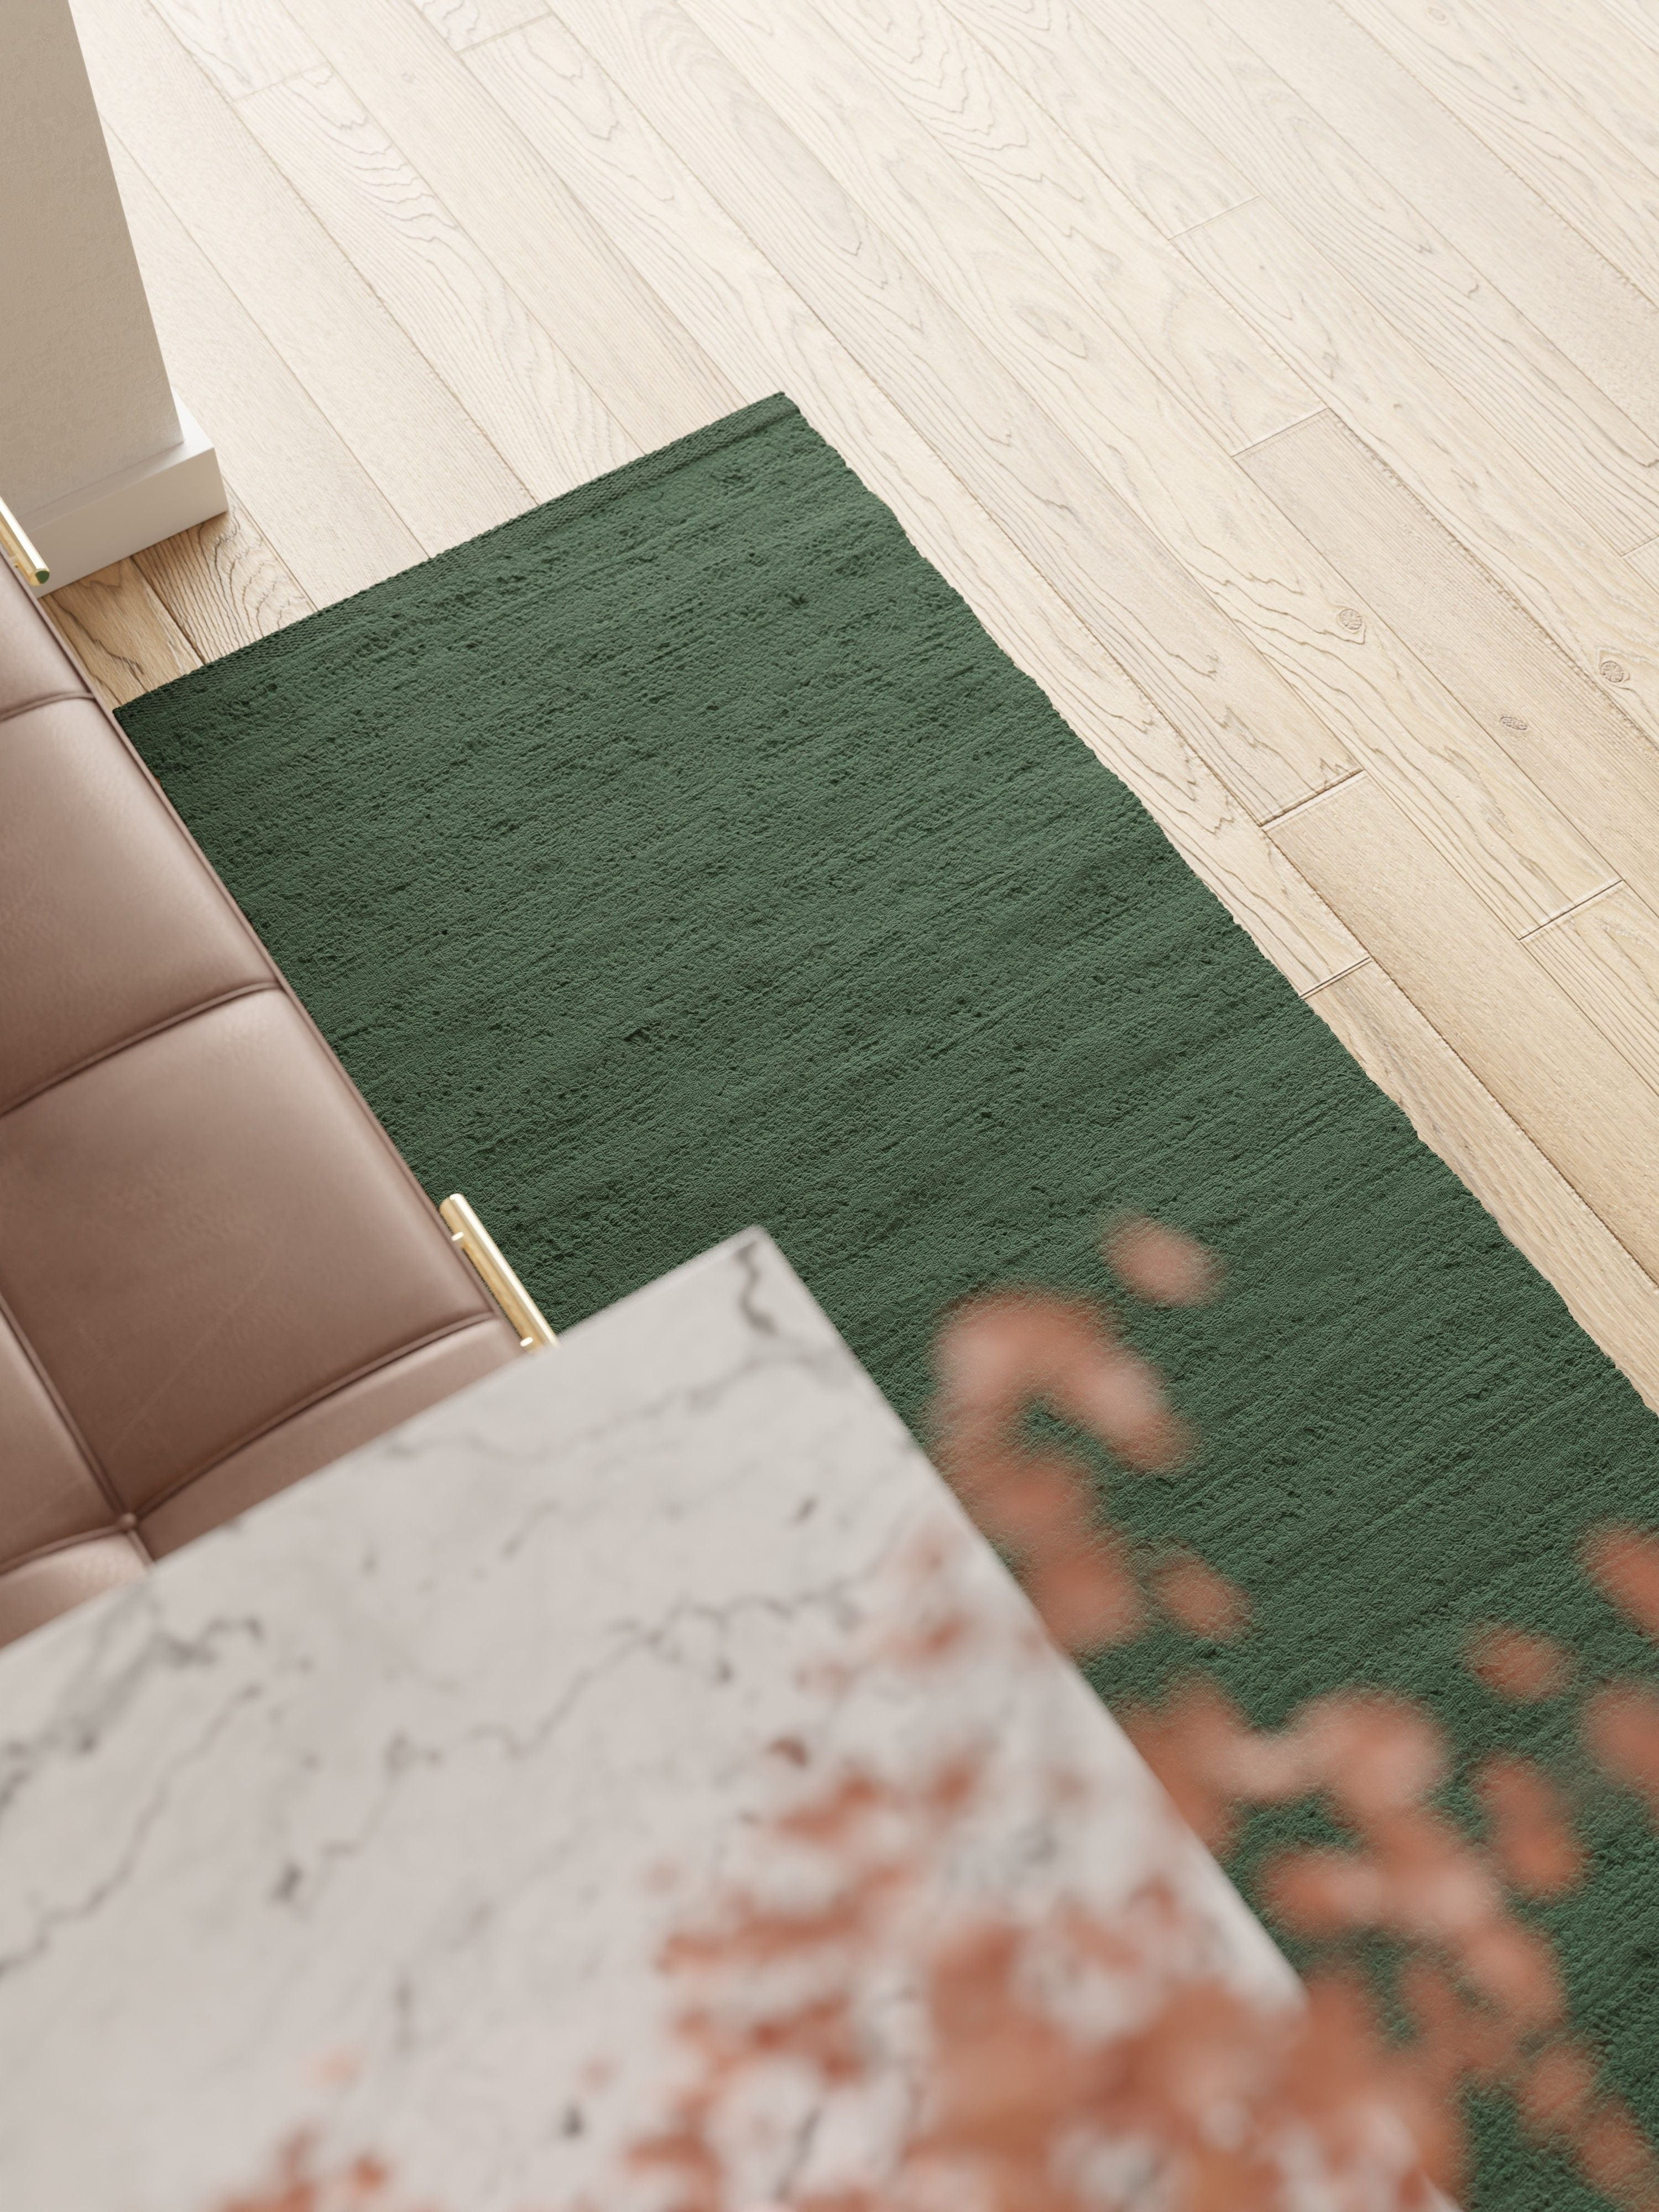 Rug Solid Cotton Rug 200 X 300 Cm, Moss